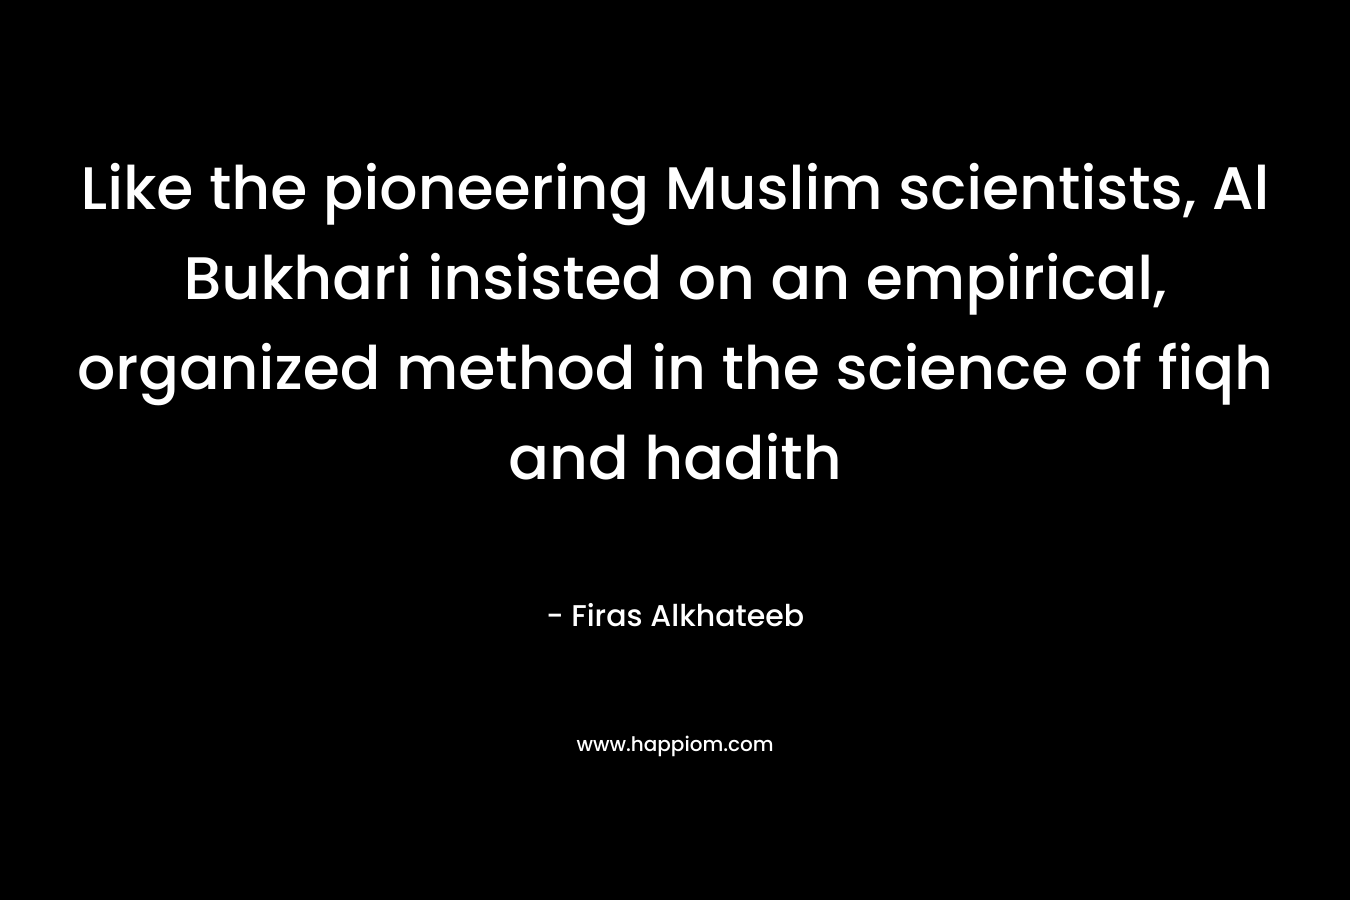 Like the pioneering Muslim scientists, Al Bukhari insisted on an empirical, organized method in the science of fiqh and hadith